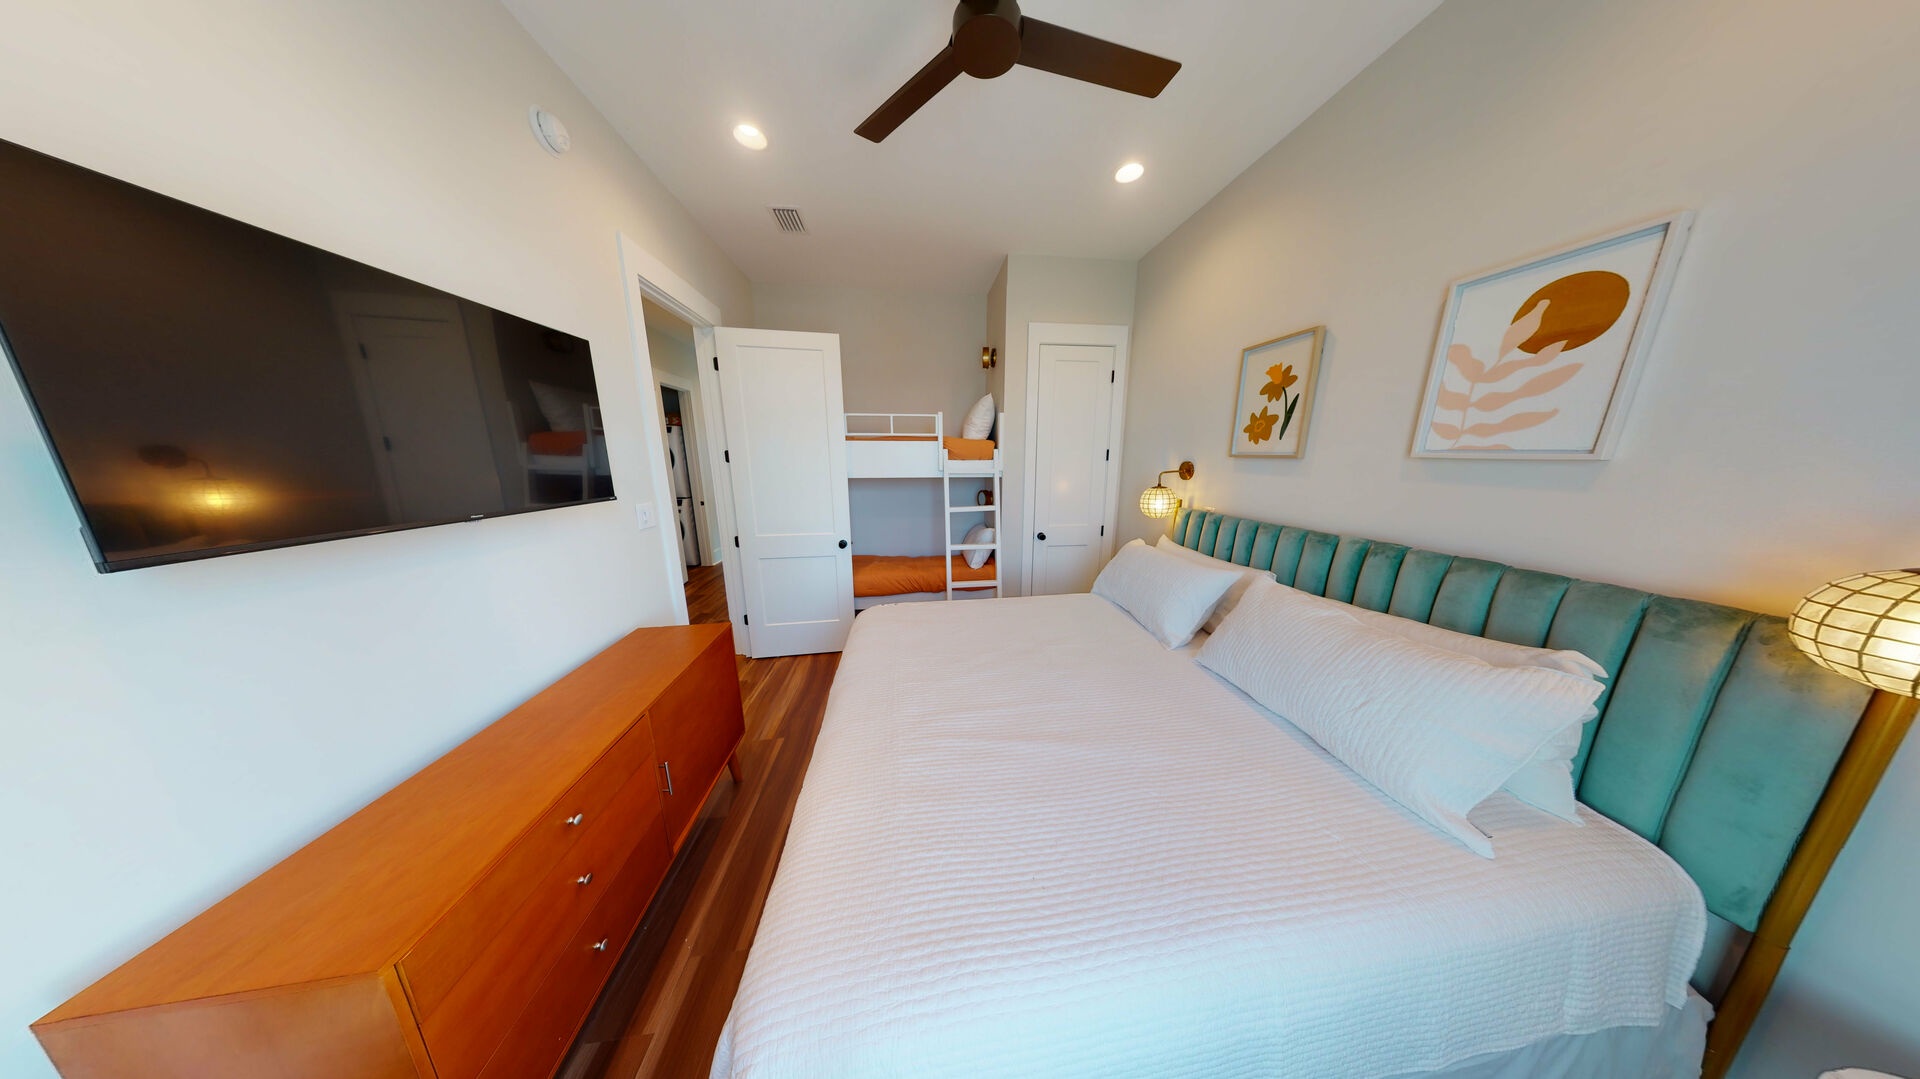 Bedroom #6 on the 3rd floor sleeps 4 in a king + 2 twin bunks. The room also has a private bathroom and a TV